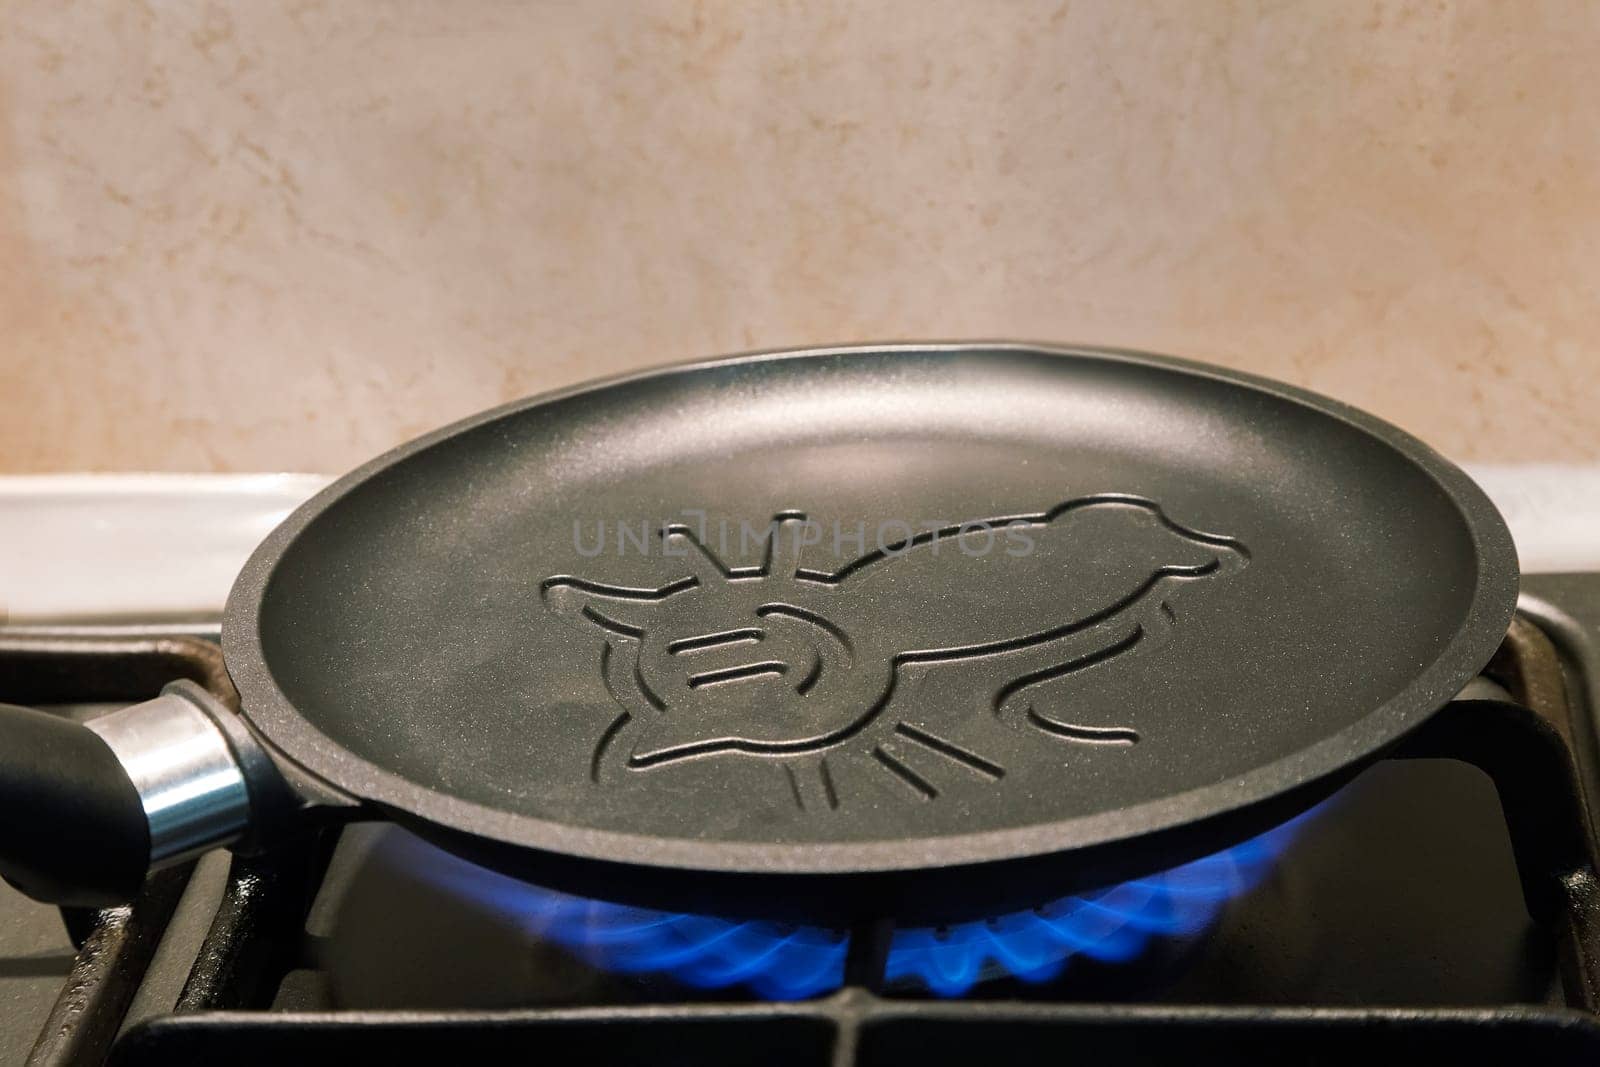 On fire of the gas stove heats up a cast iron frying pan for pancakes with ceramic coating.